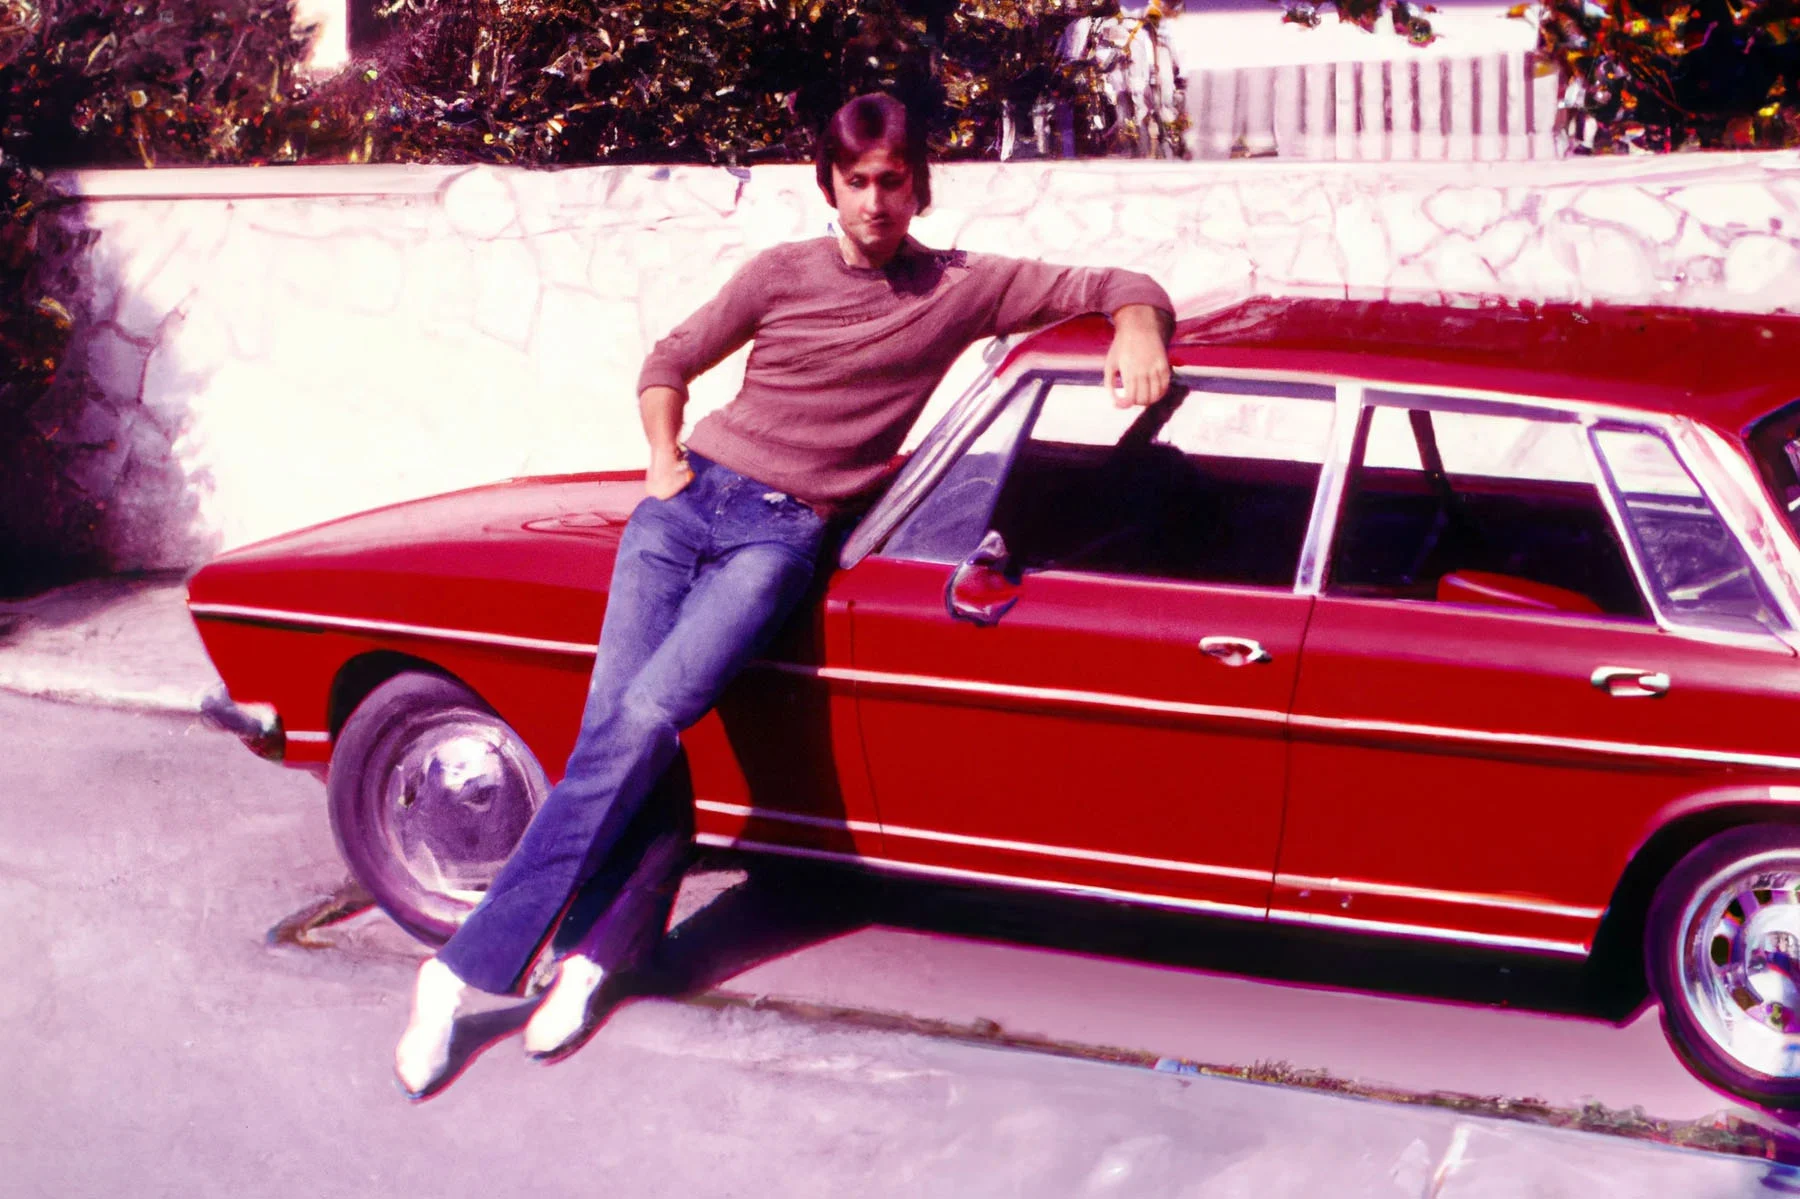 An image that looks like a photograph but is created with the use of Artificial Intelligence. The image has an 80s aesthetic, showing a man around 25-30 years old leaning proudly on a shiny red car parked outside what looks like a stone fence of a house. 